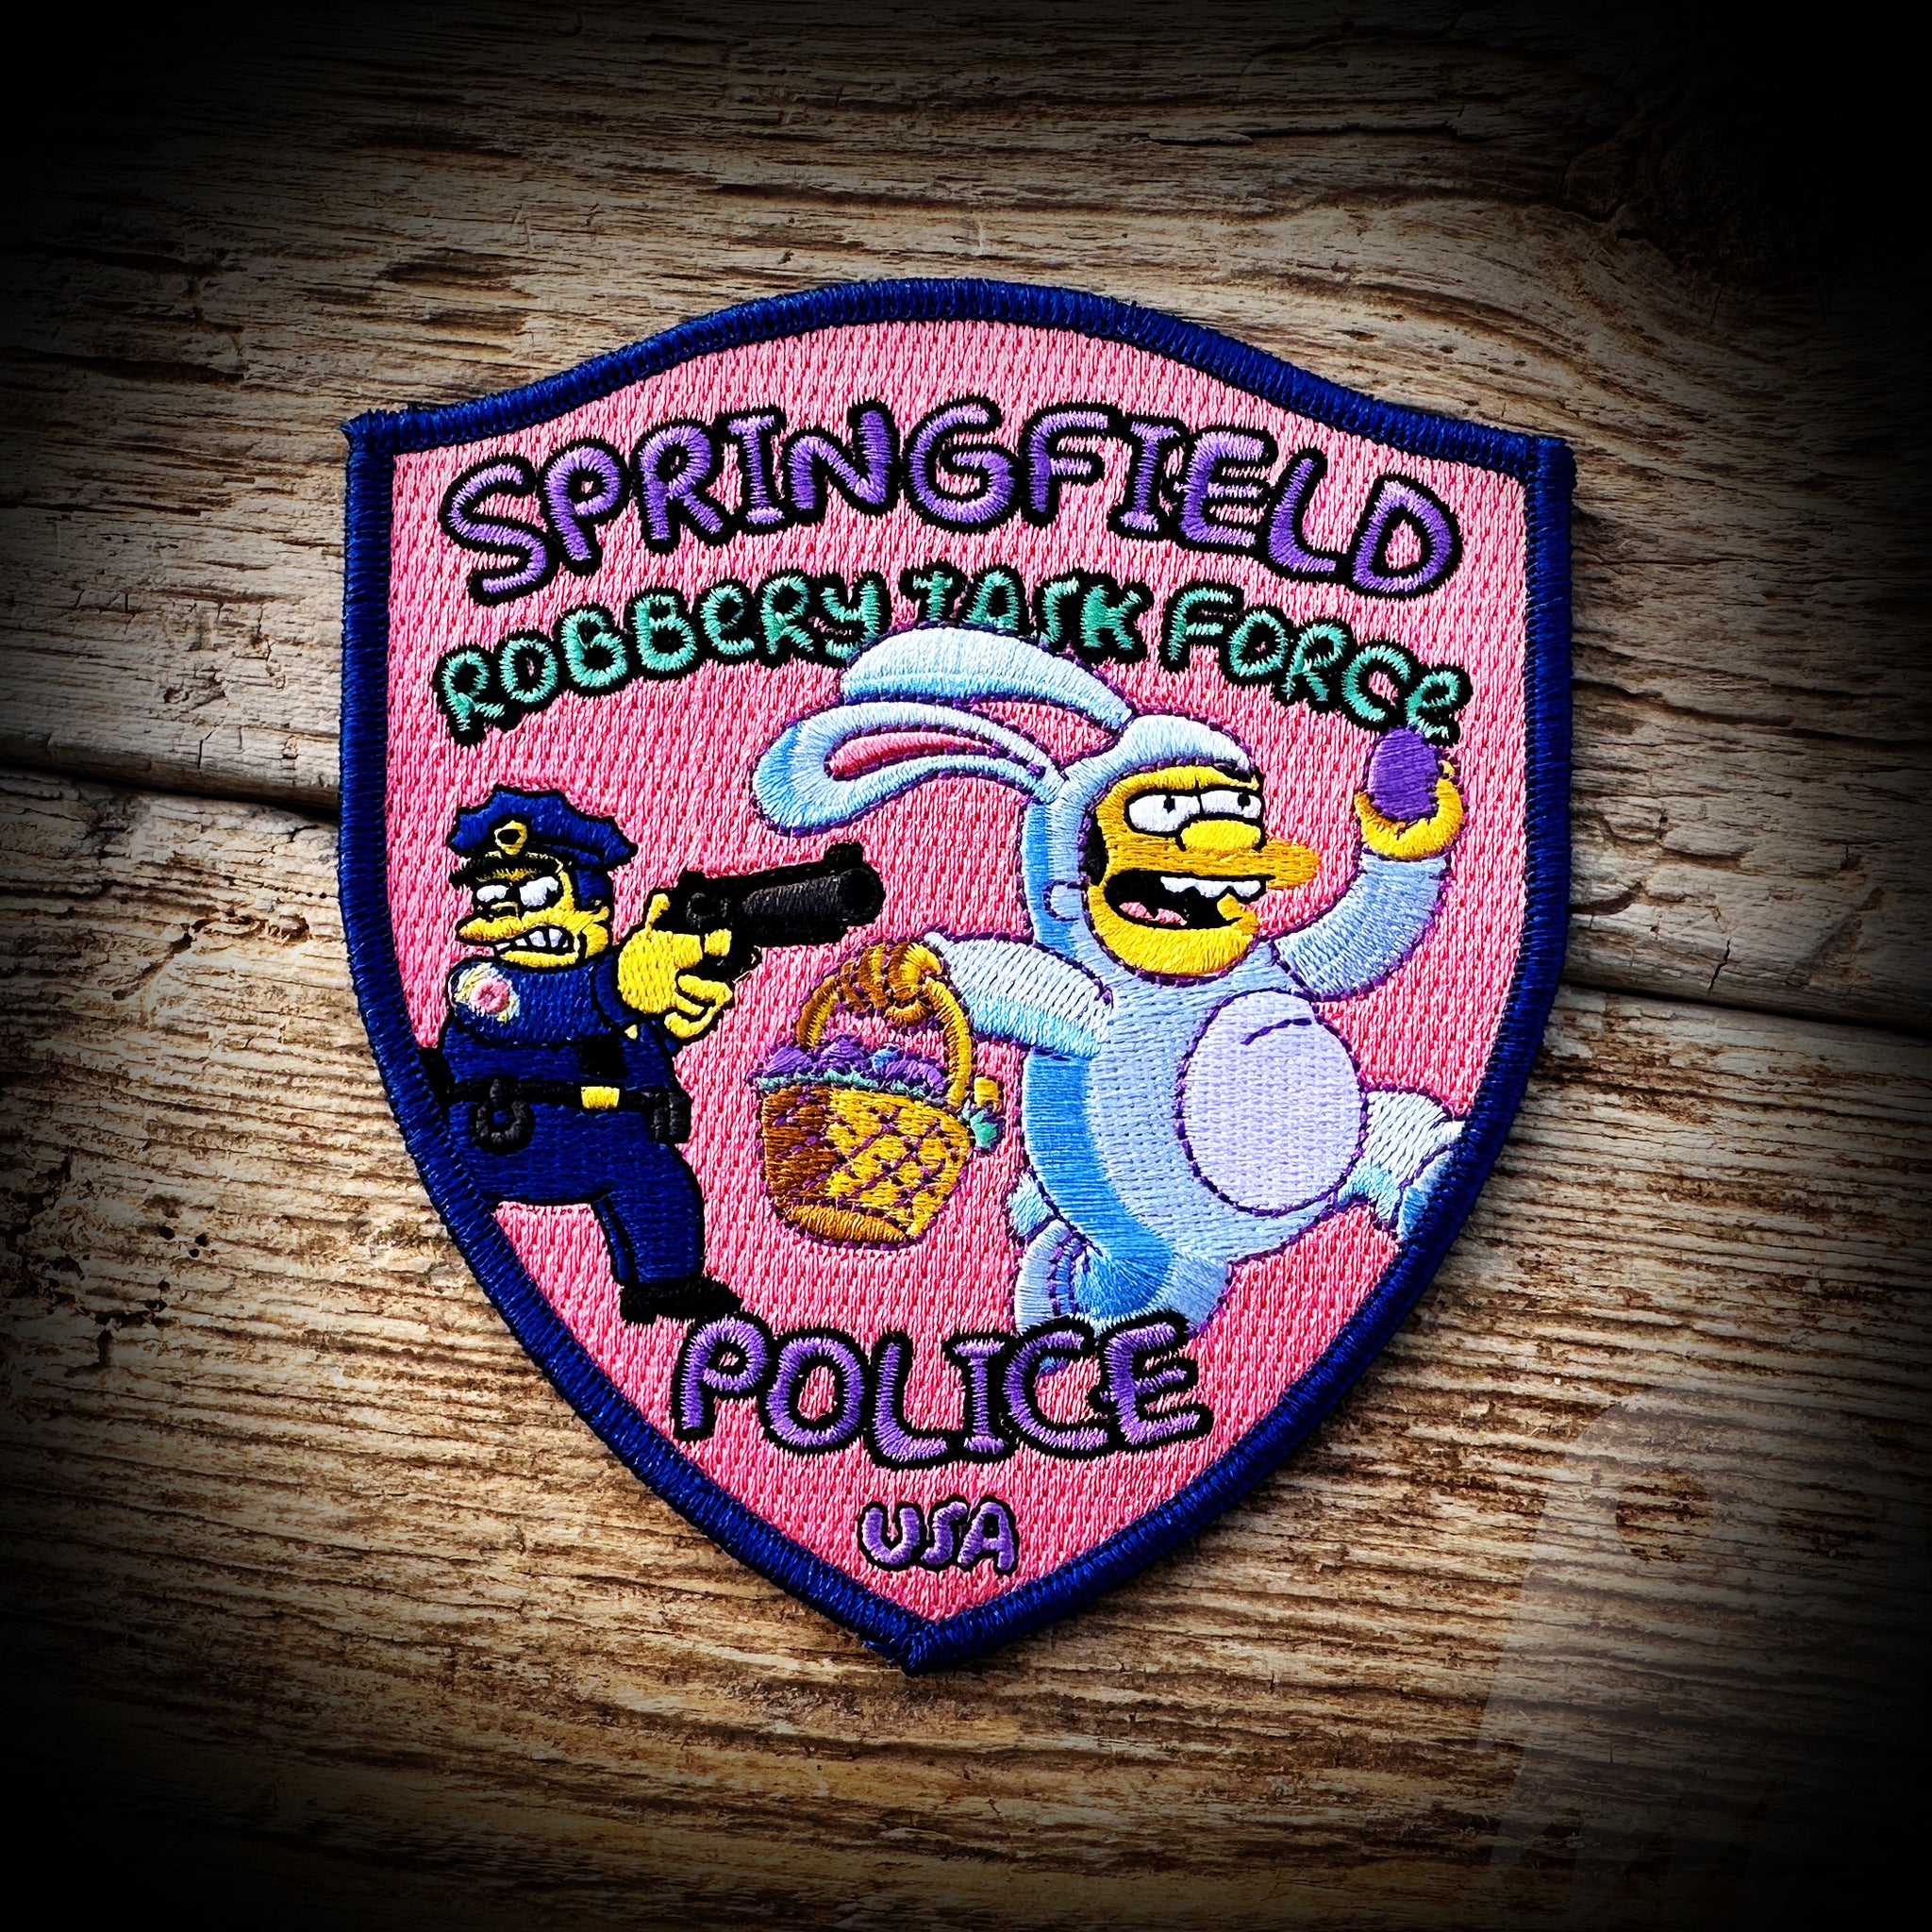 EASTER #38 Springfield Police Robbery Task Force - The Simpsons - EASTER